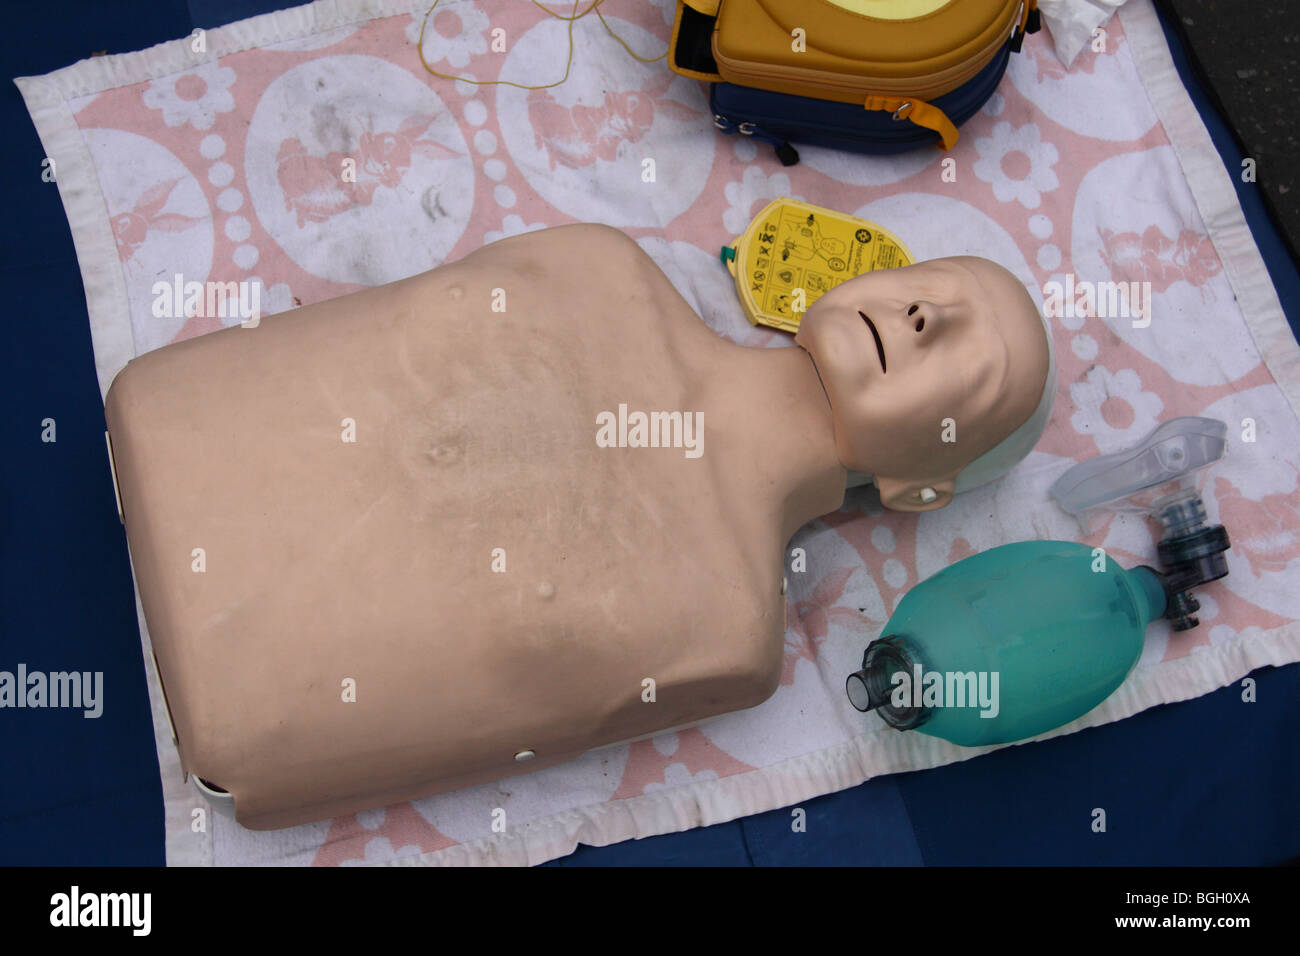 Dummy used to practice first aid Stock Photo